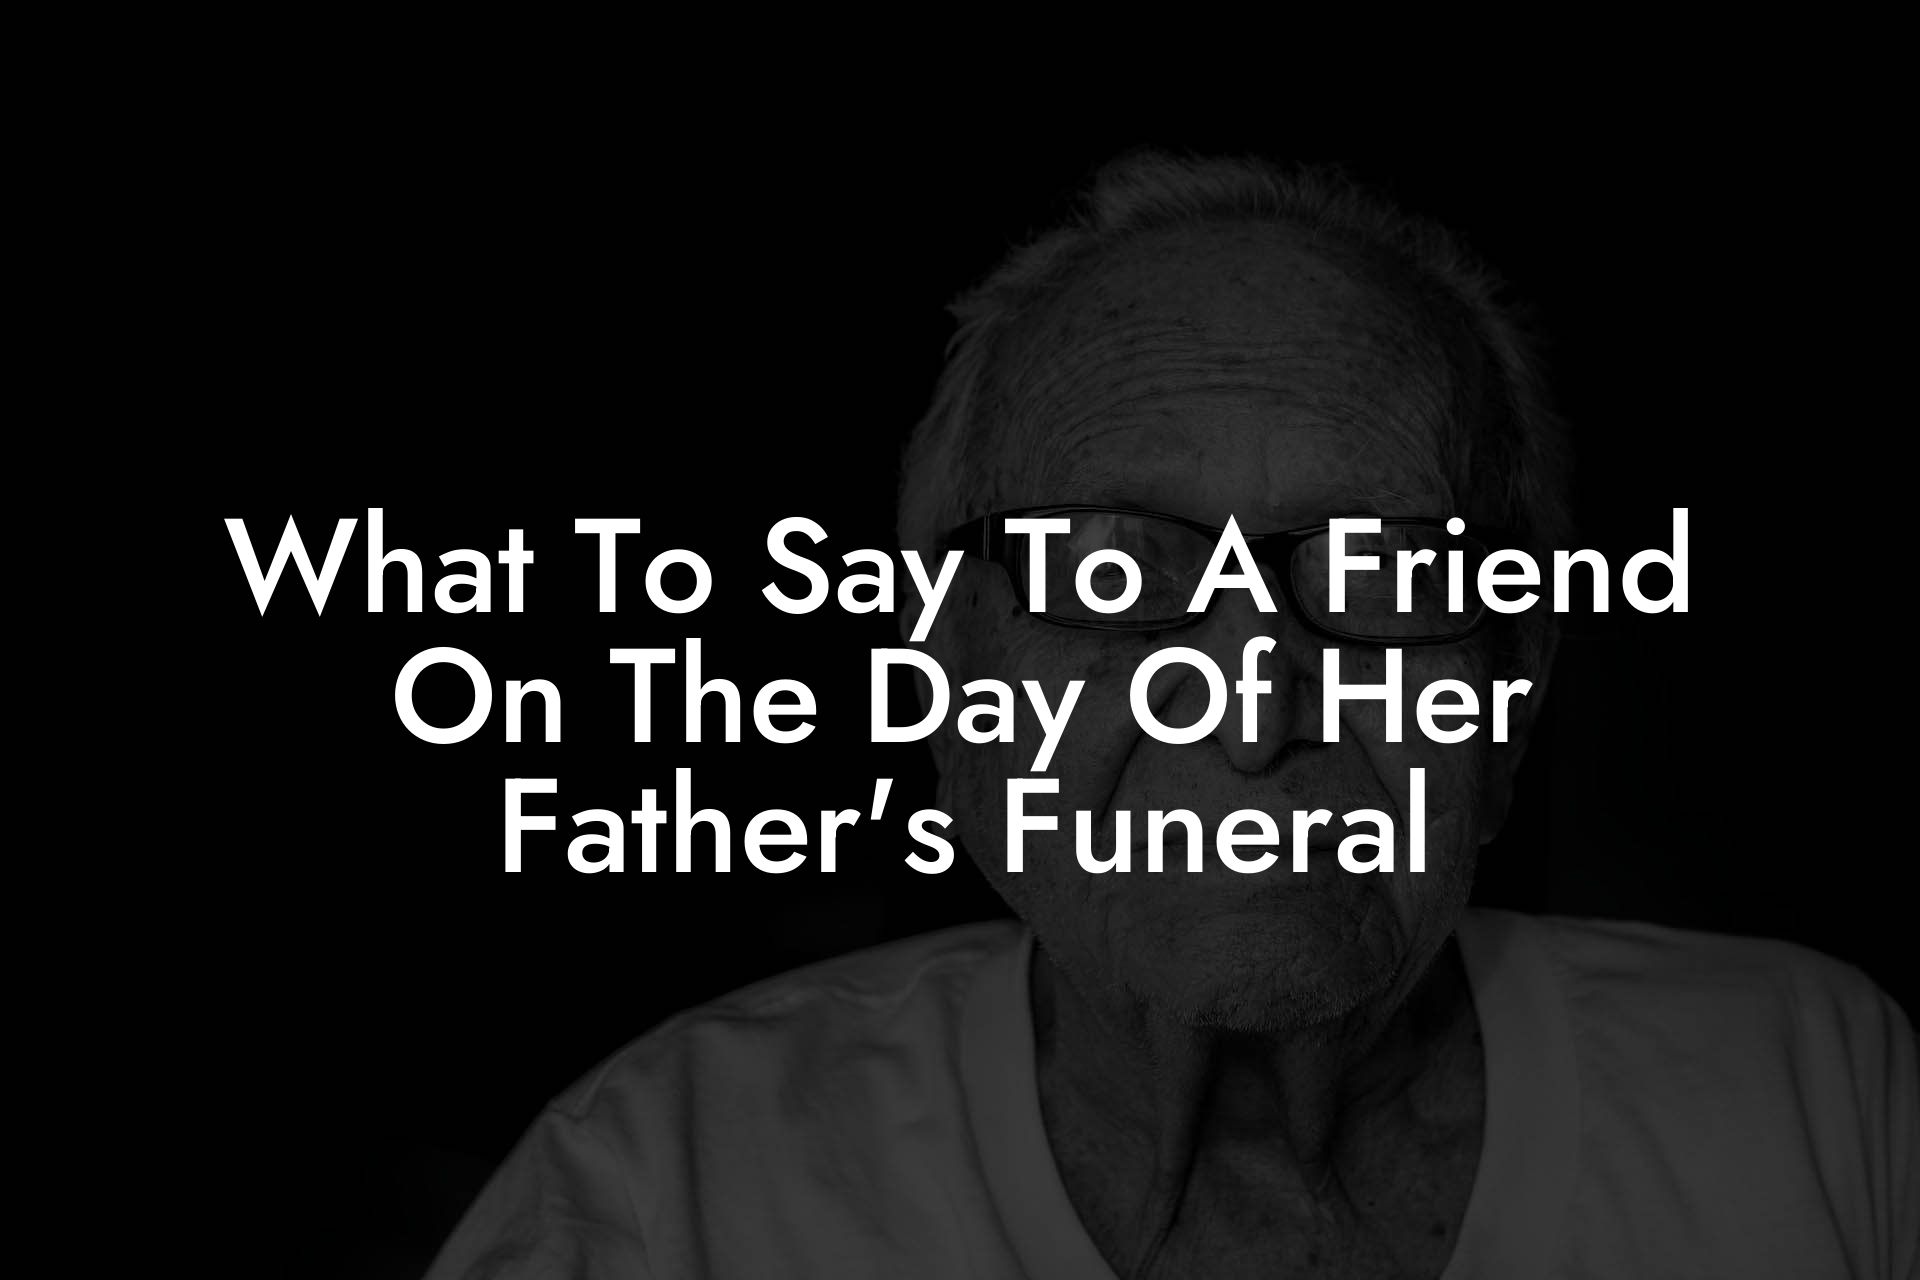 What To Say To A Friend On The Day Of Her Father's Funeral